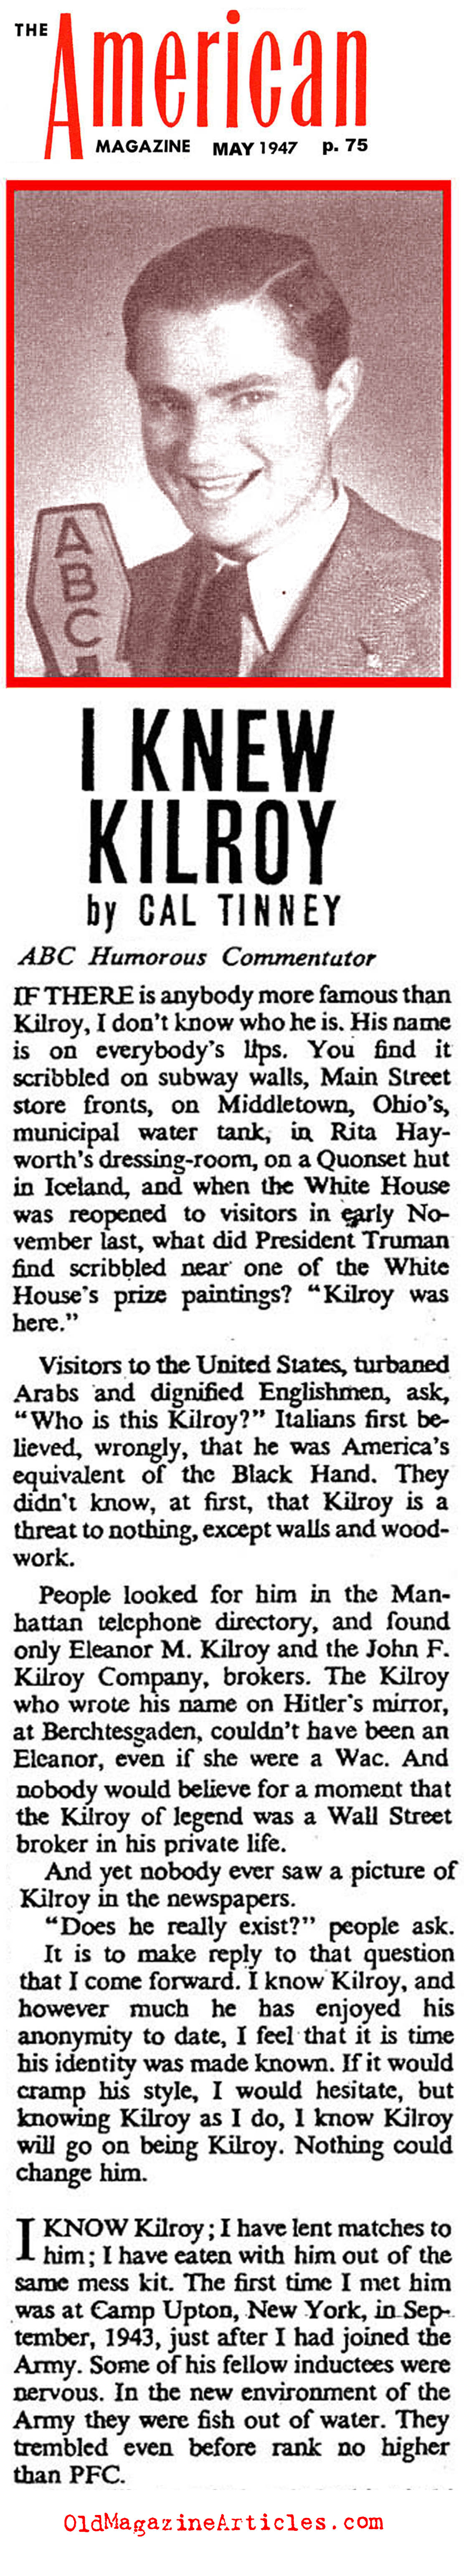 Who was Kilroy? (Various Sources, 1945 -7)